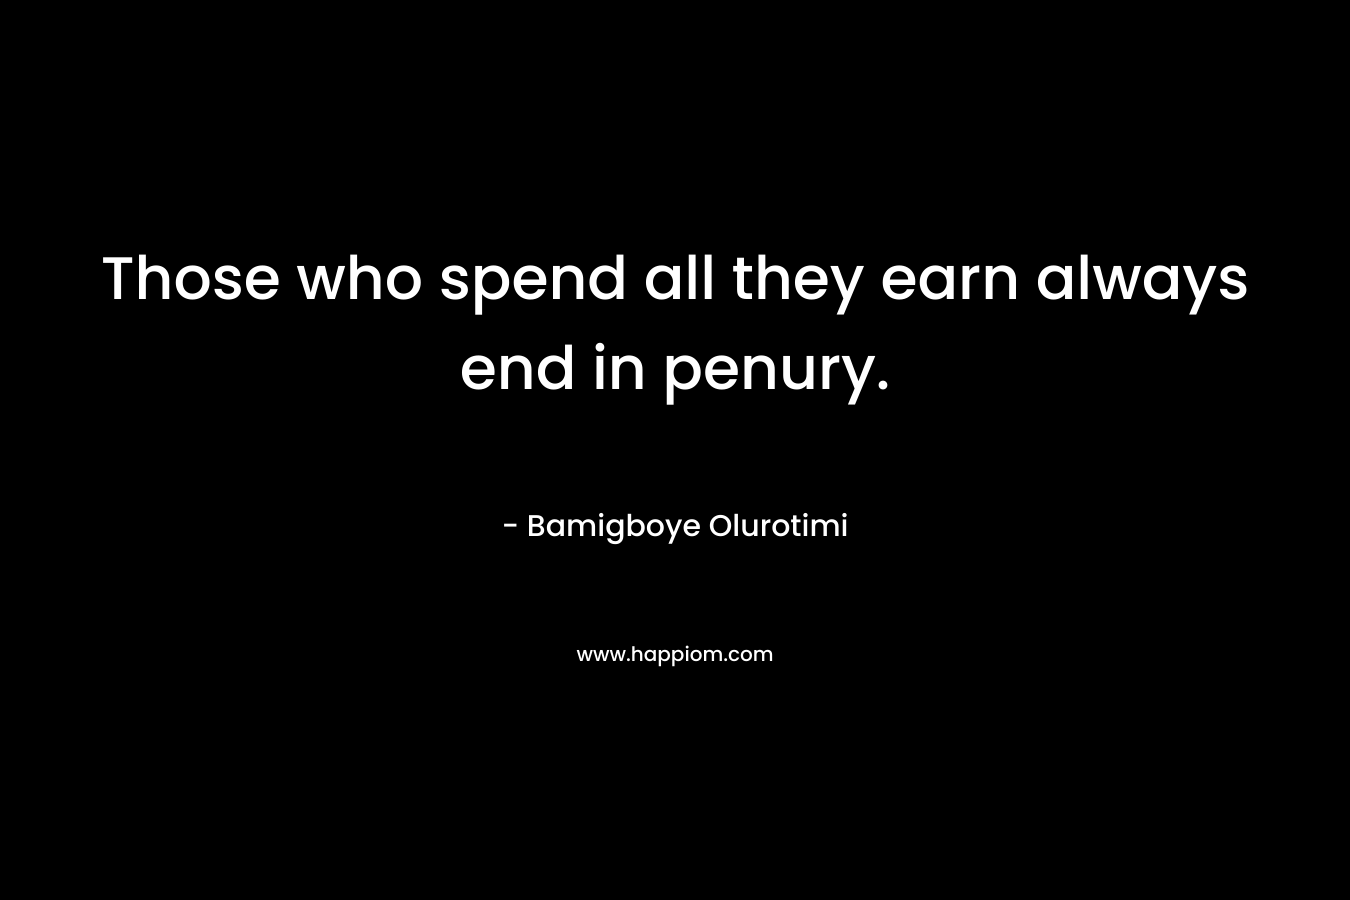 Those who spend all they earn always end in penury.